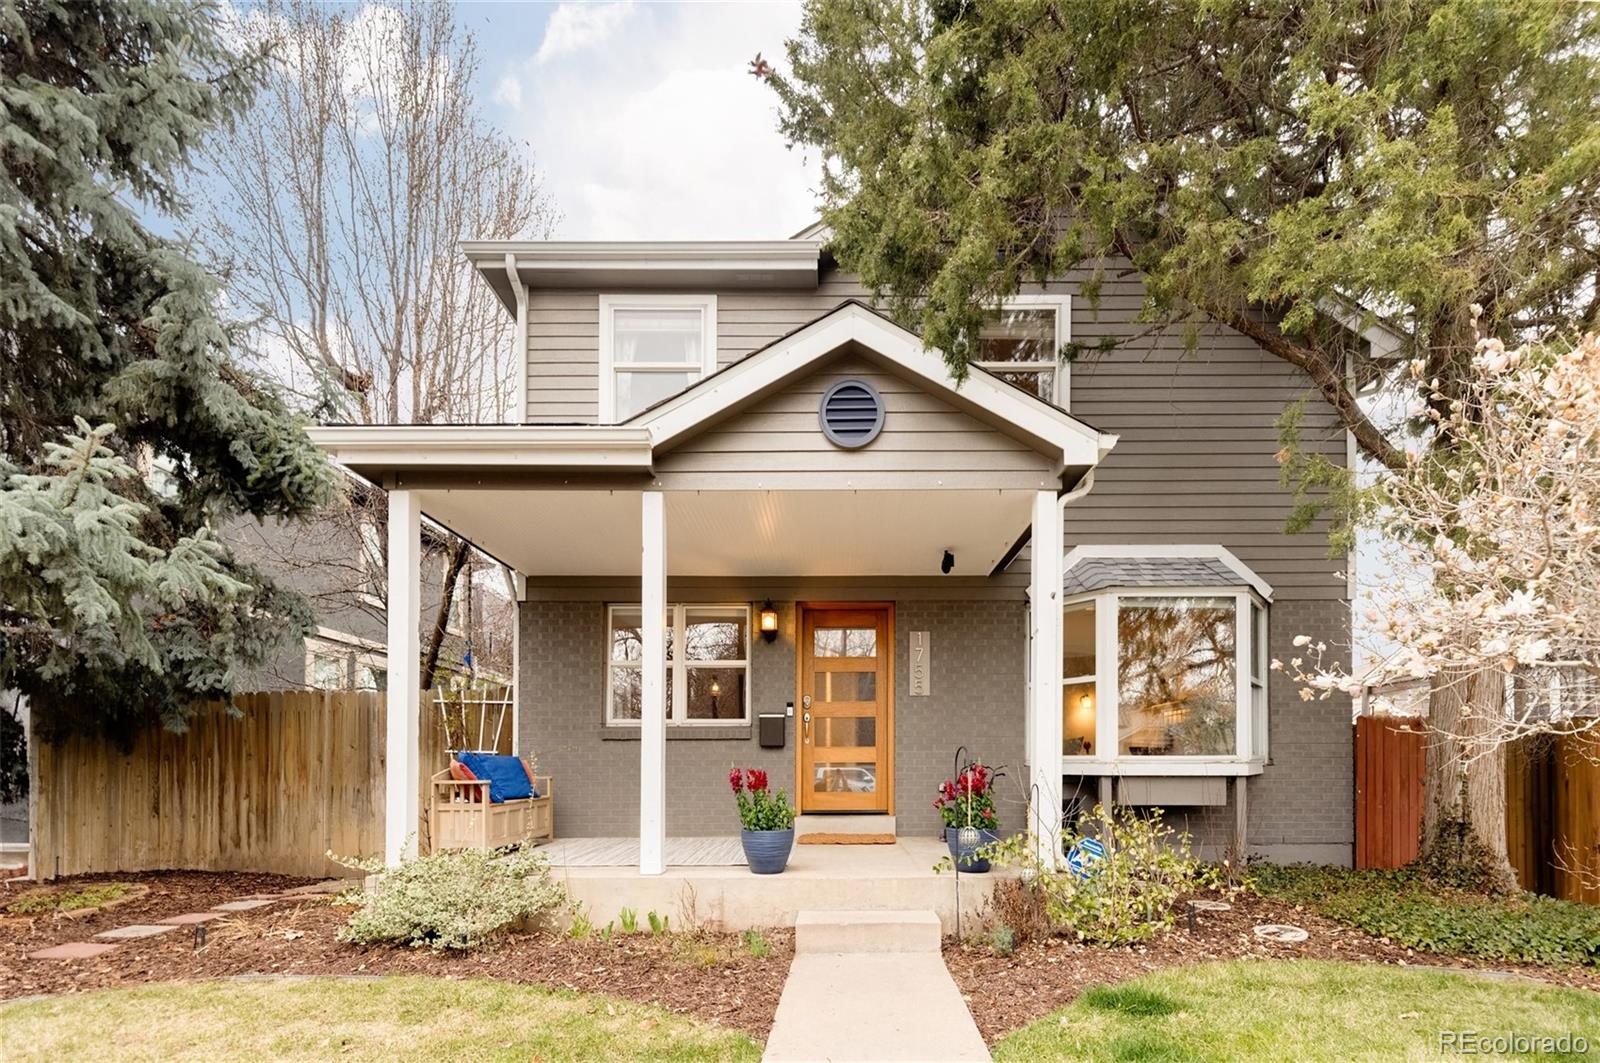 1755 s corona street, denver sold home. Closed on 2024-05-07 for $1,266,000.